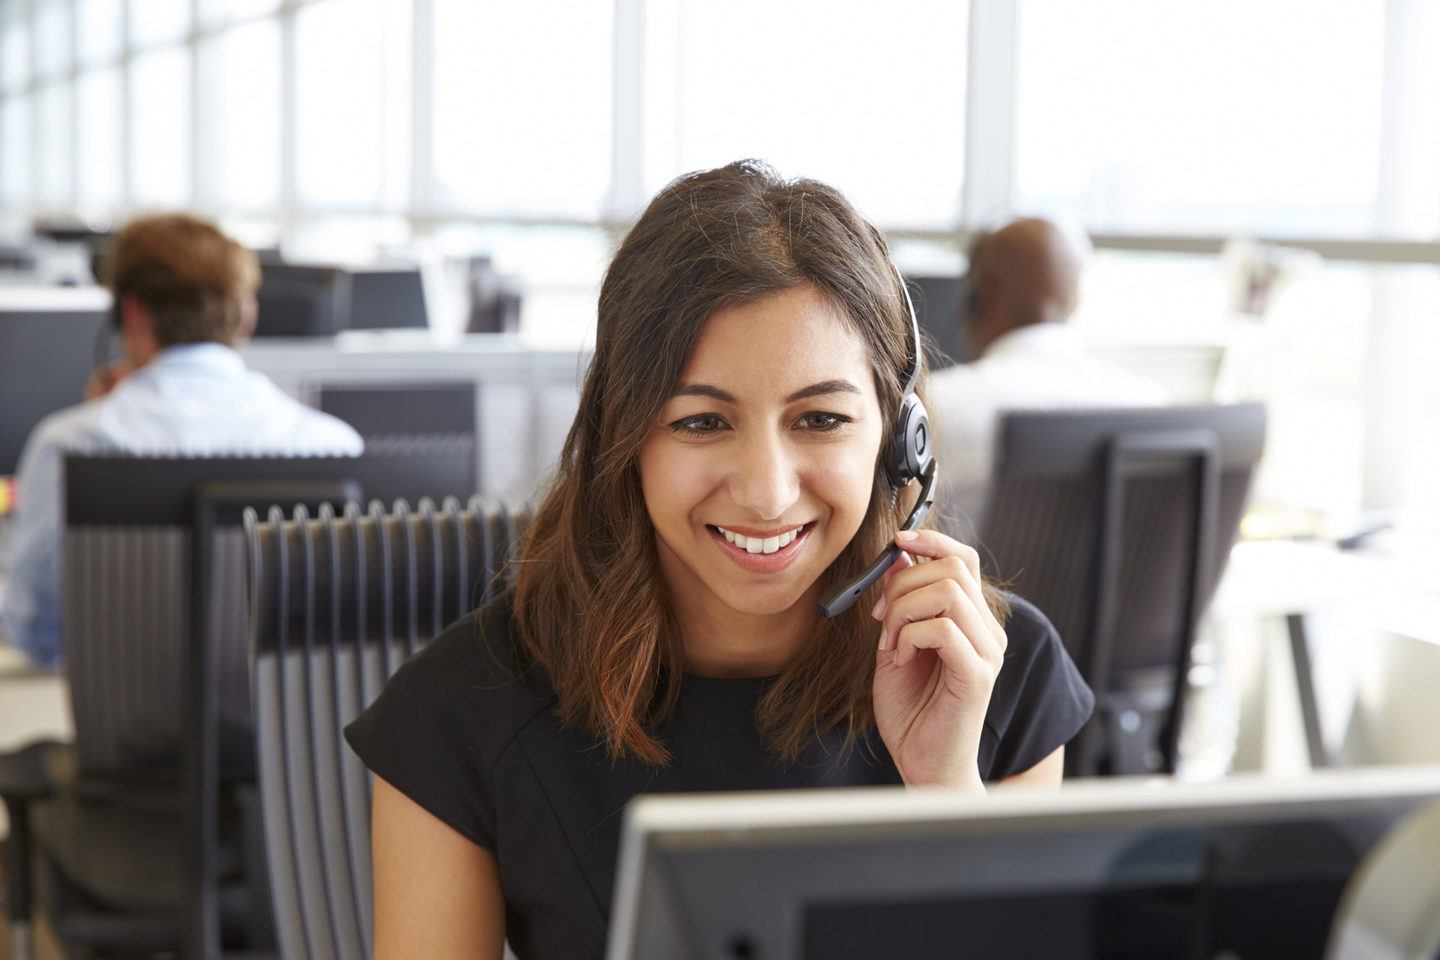 Is Your Unified Communications Solution Ready for Employees to Work From Anywhere